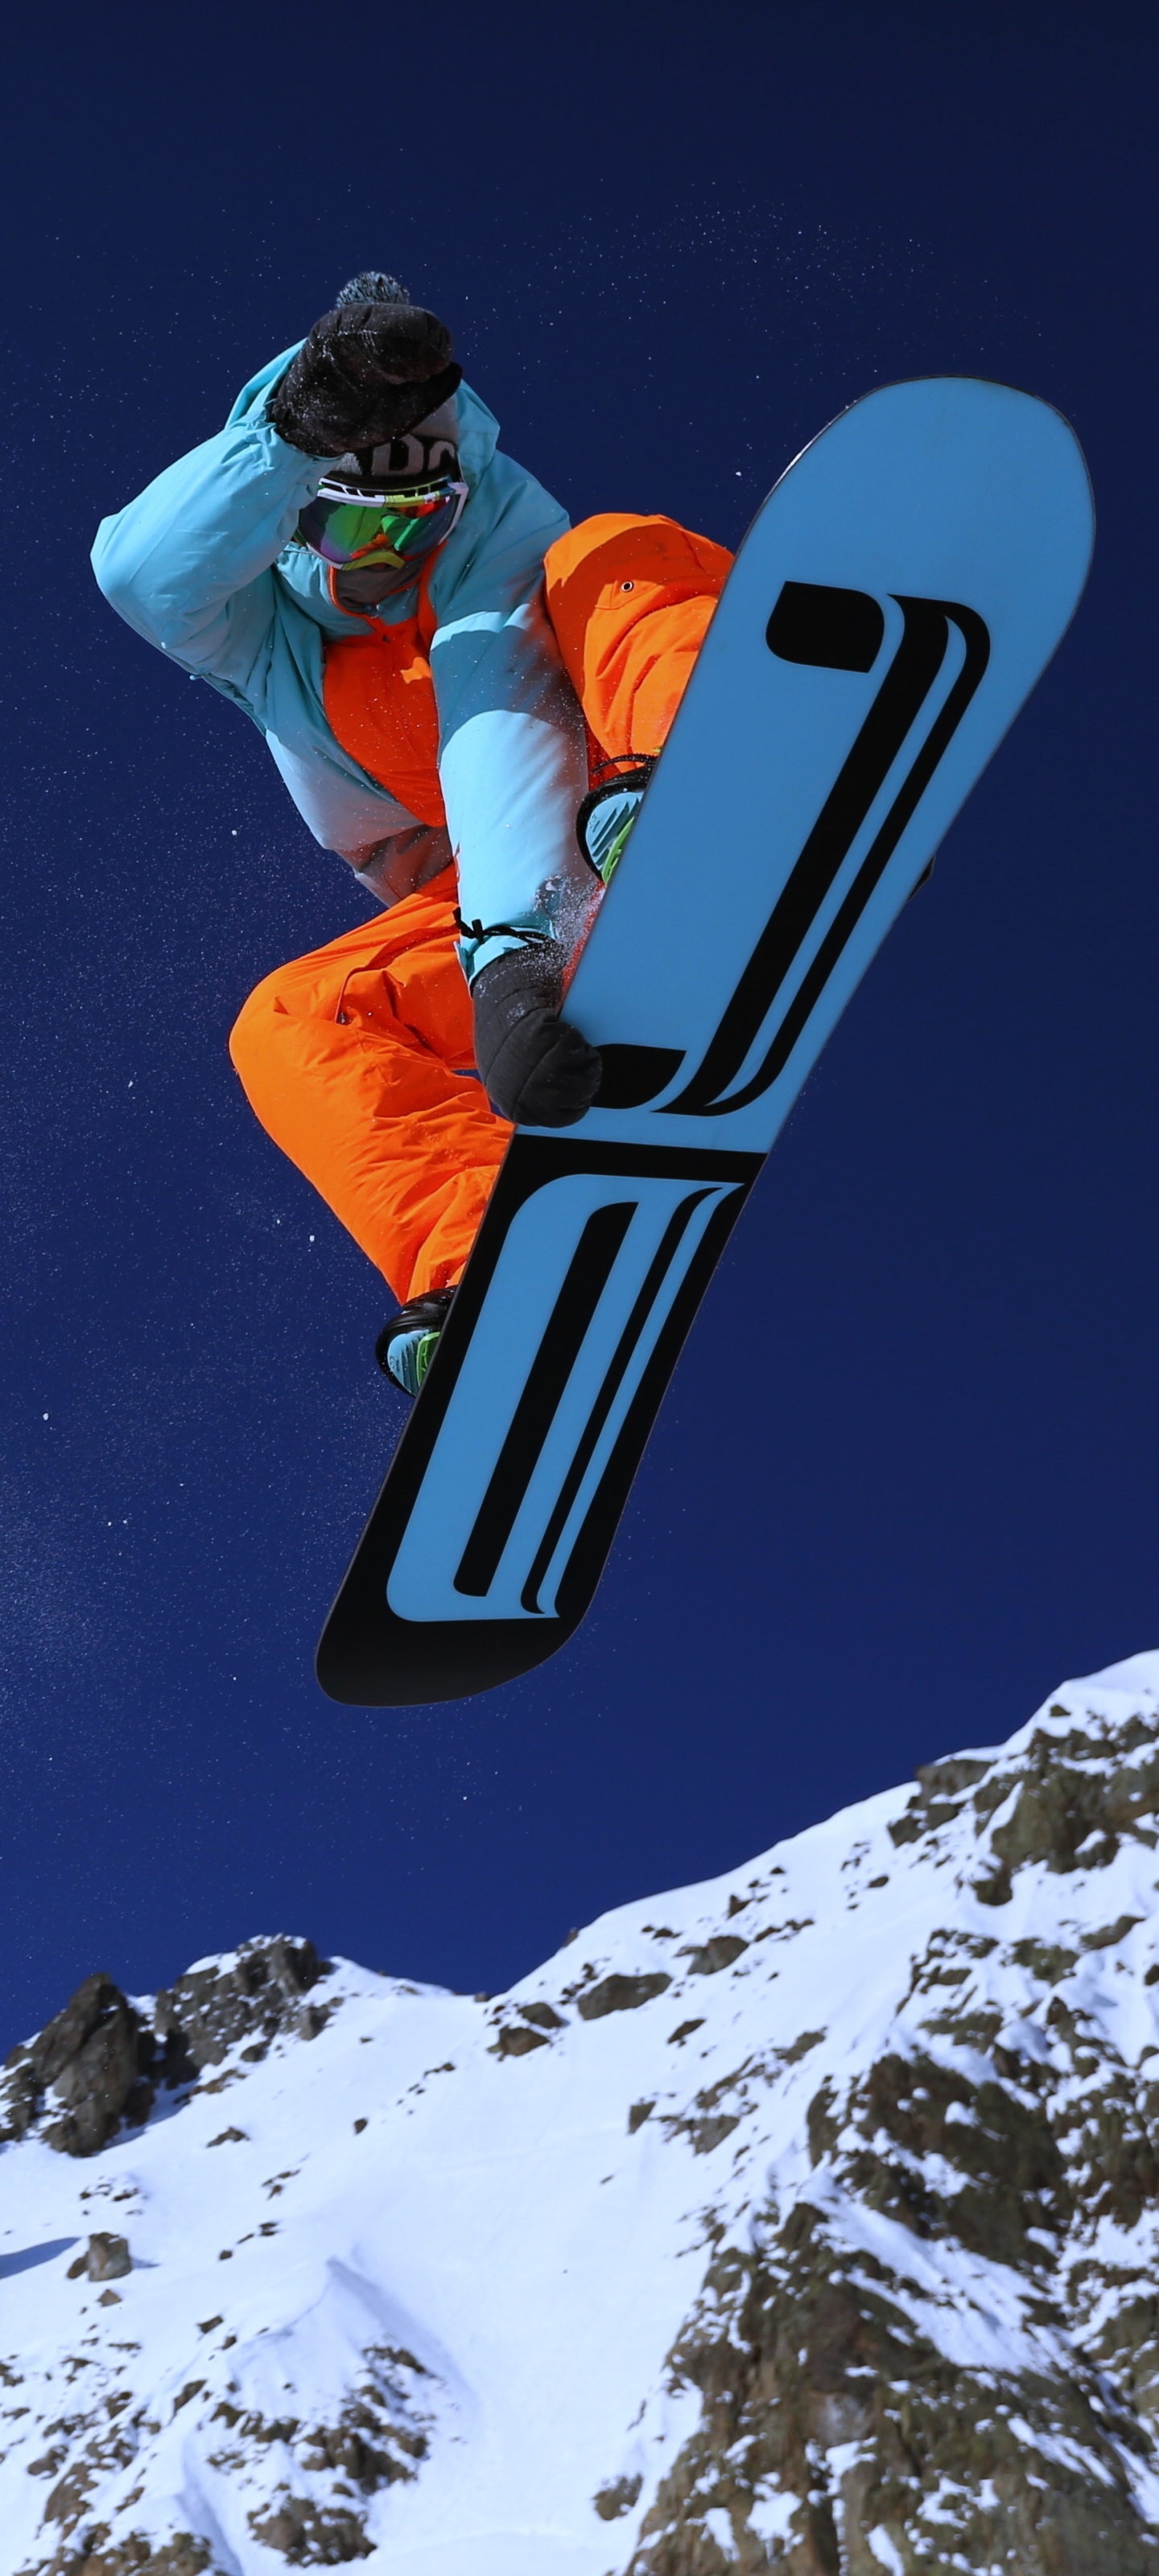 Snowboarding on Top of the World HD Wallpaper iPhone 4  4S  iPod  HD  Wallpaper  Wallpapersnet